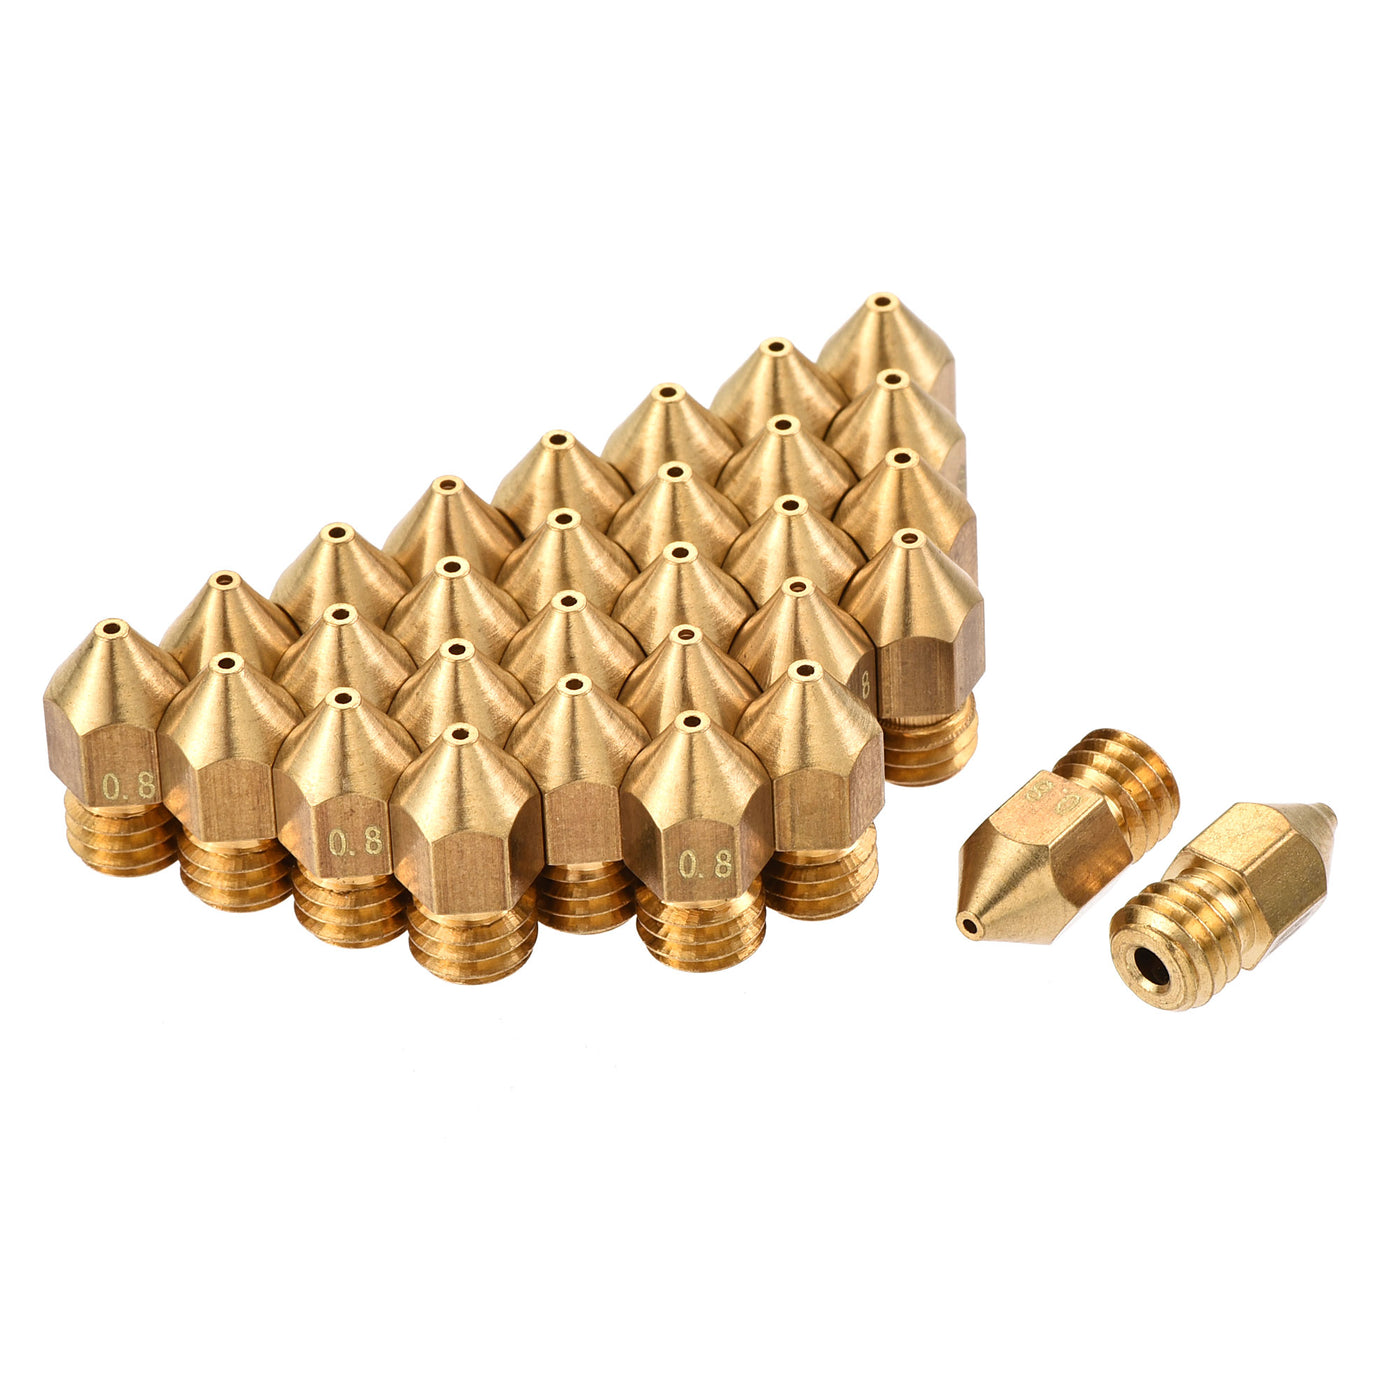 uxcell Uxcell 0.8mm 3D Printer Nozzle, 30pcs M6 Thread for MK8 1.75mm Extruder Print, Brass